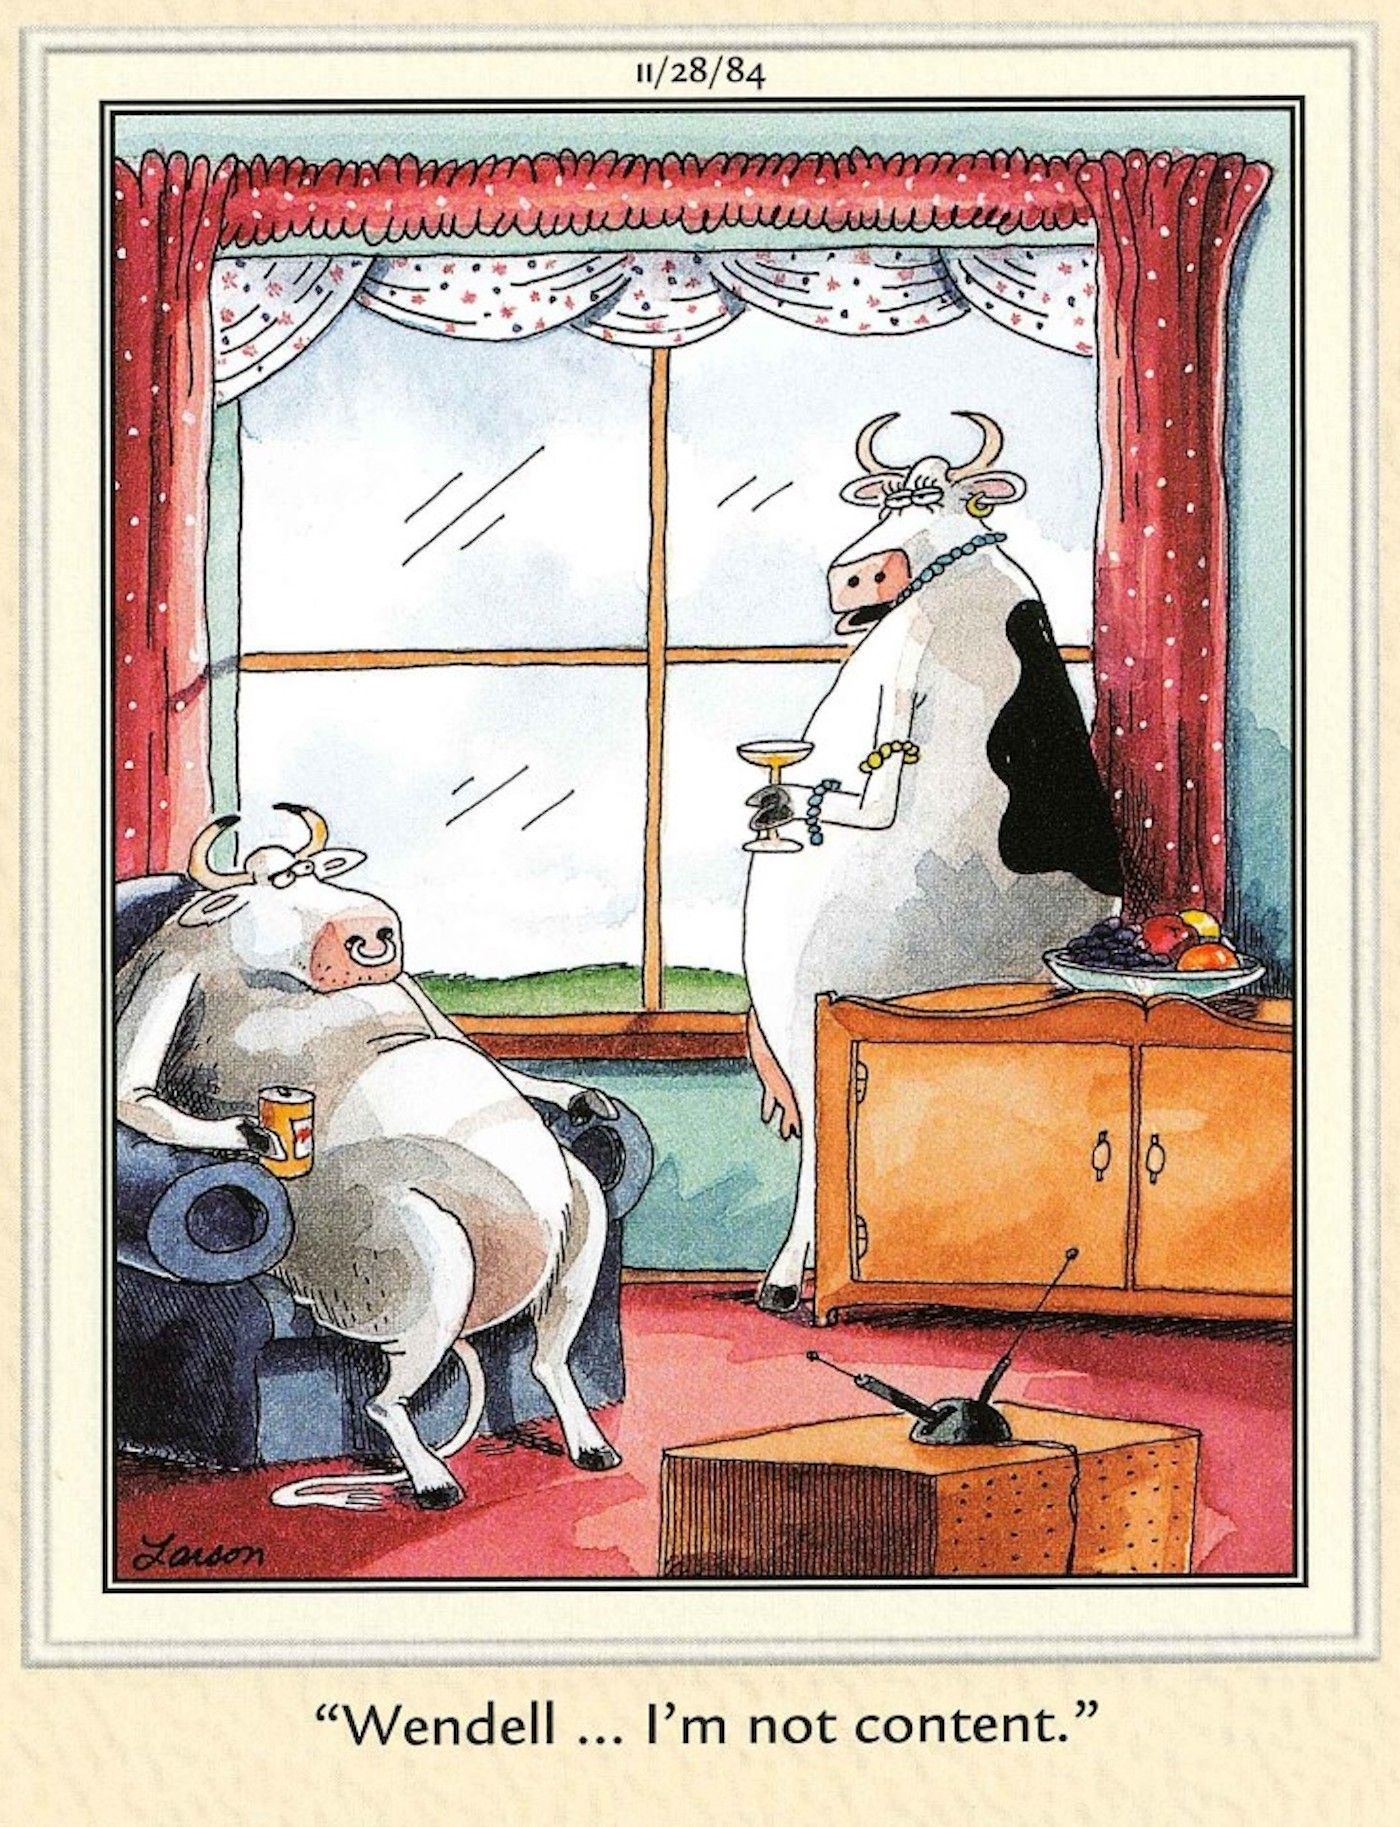 A cow in The Far Side says she's not content